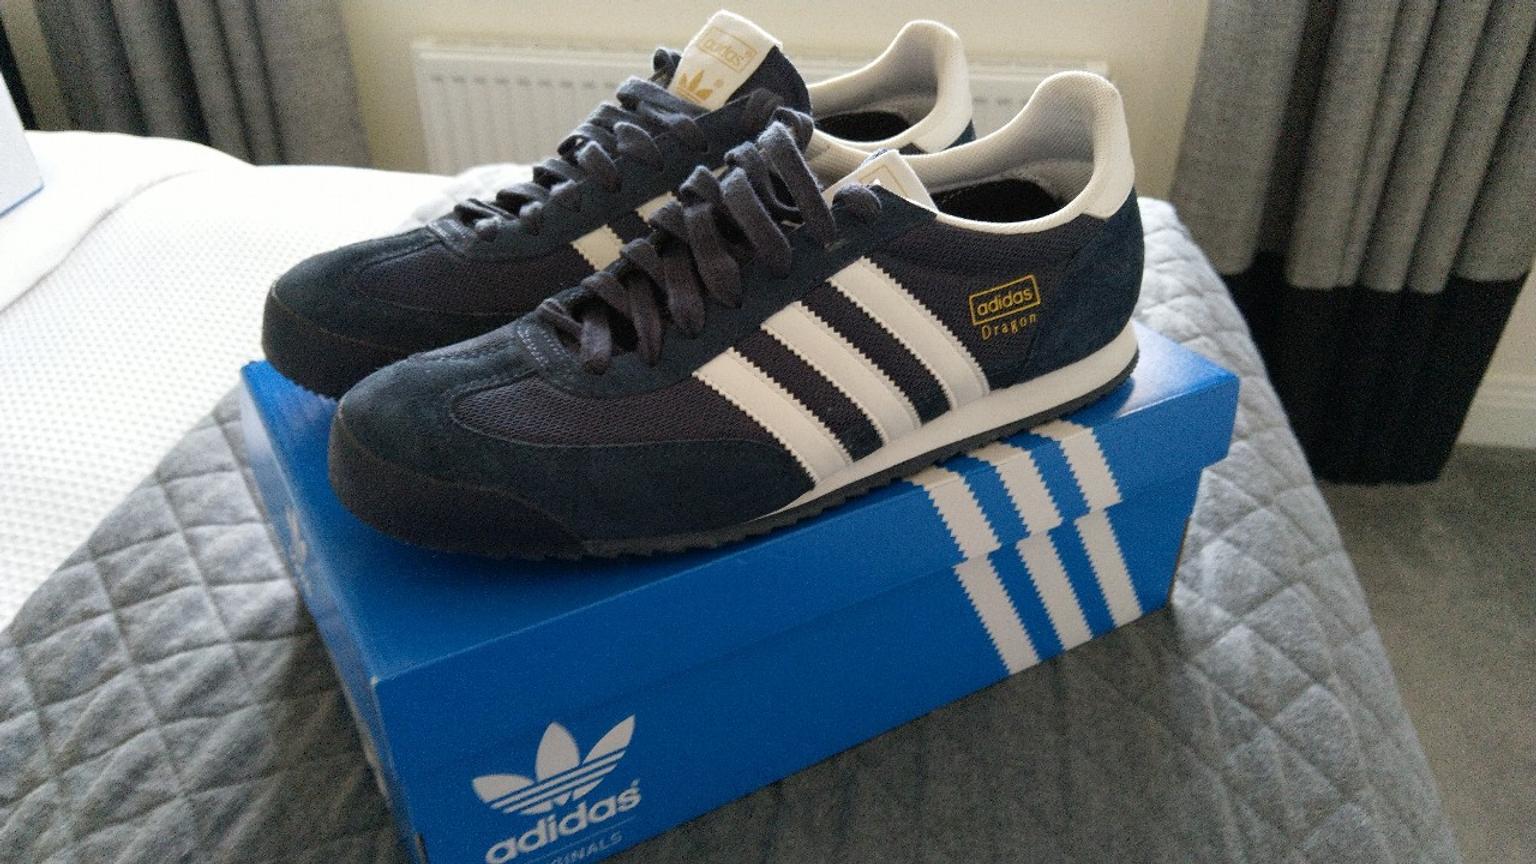 Adidas Dragon Trainers Size 9 (EU 43) in PR4 Fylde for £40.00 for sale |  Shpock